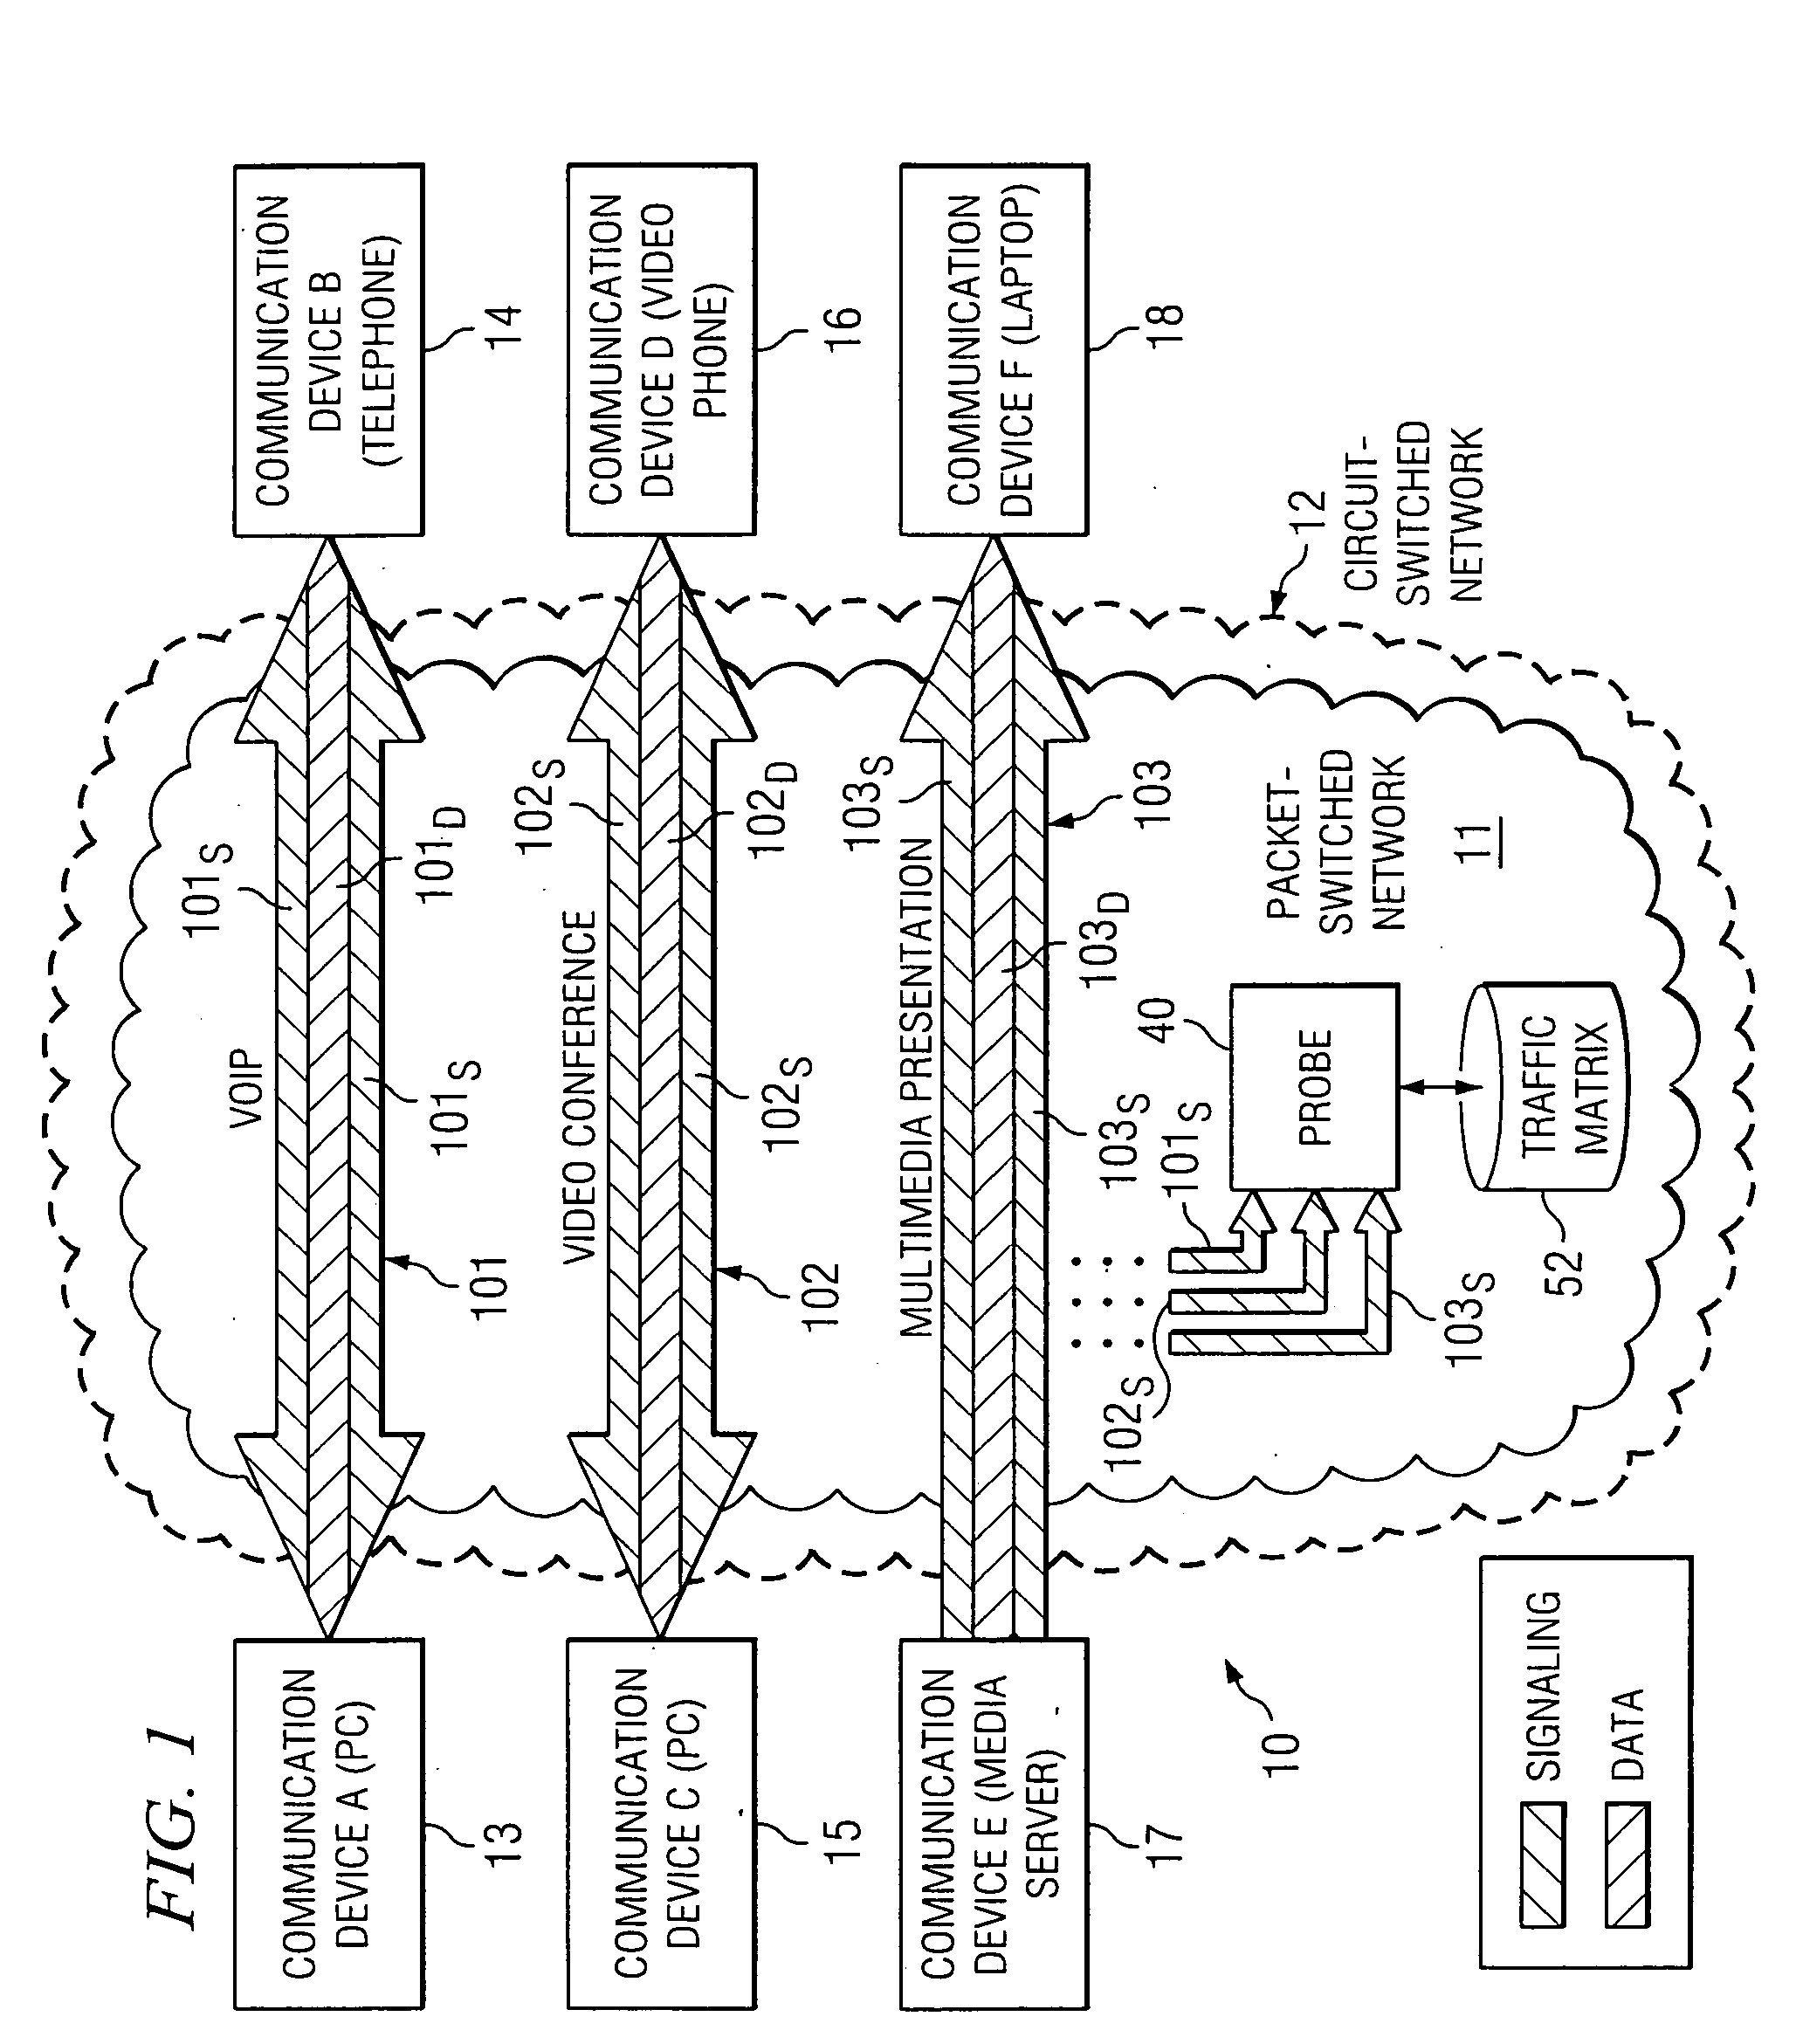 System and method for computing demand placed on a packet-switched network by streaming media communication